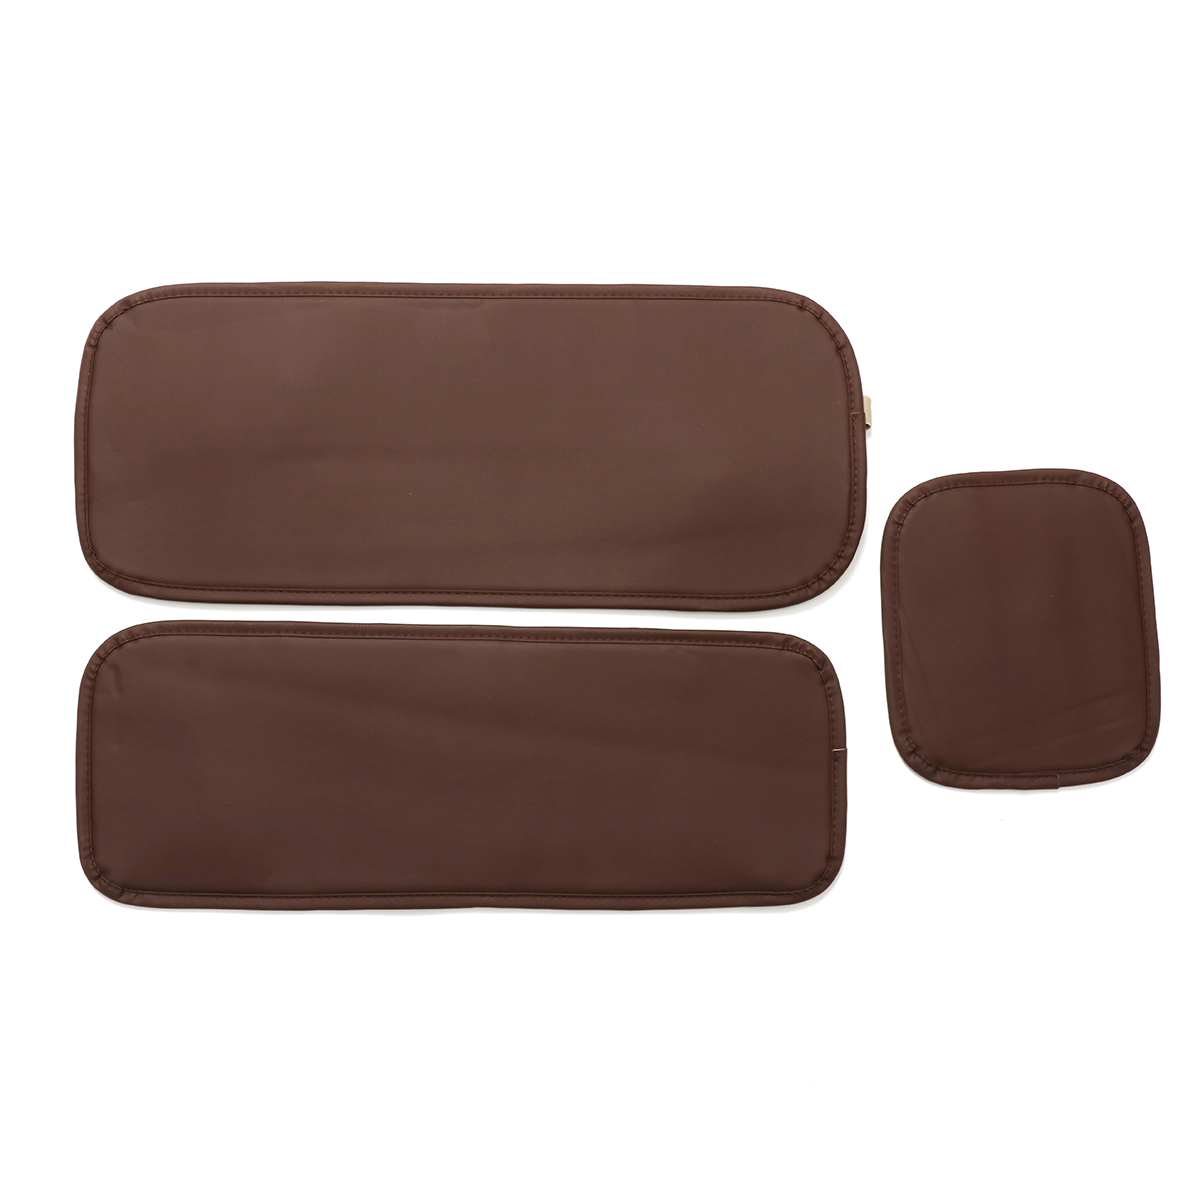 Leather Car Seat Cover 5-Seat SUV Car Seat Cushion Front Rear Set - Auto GoShop